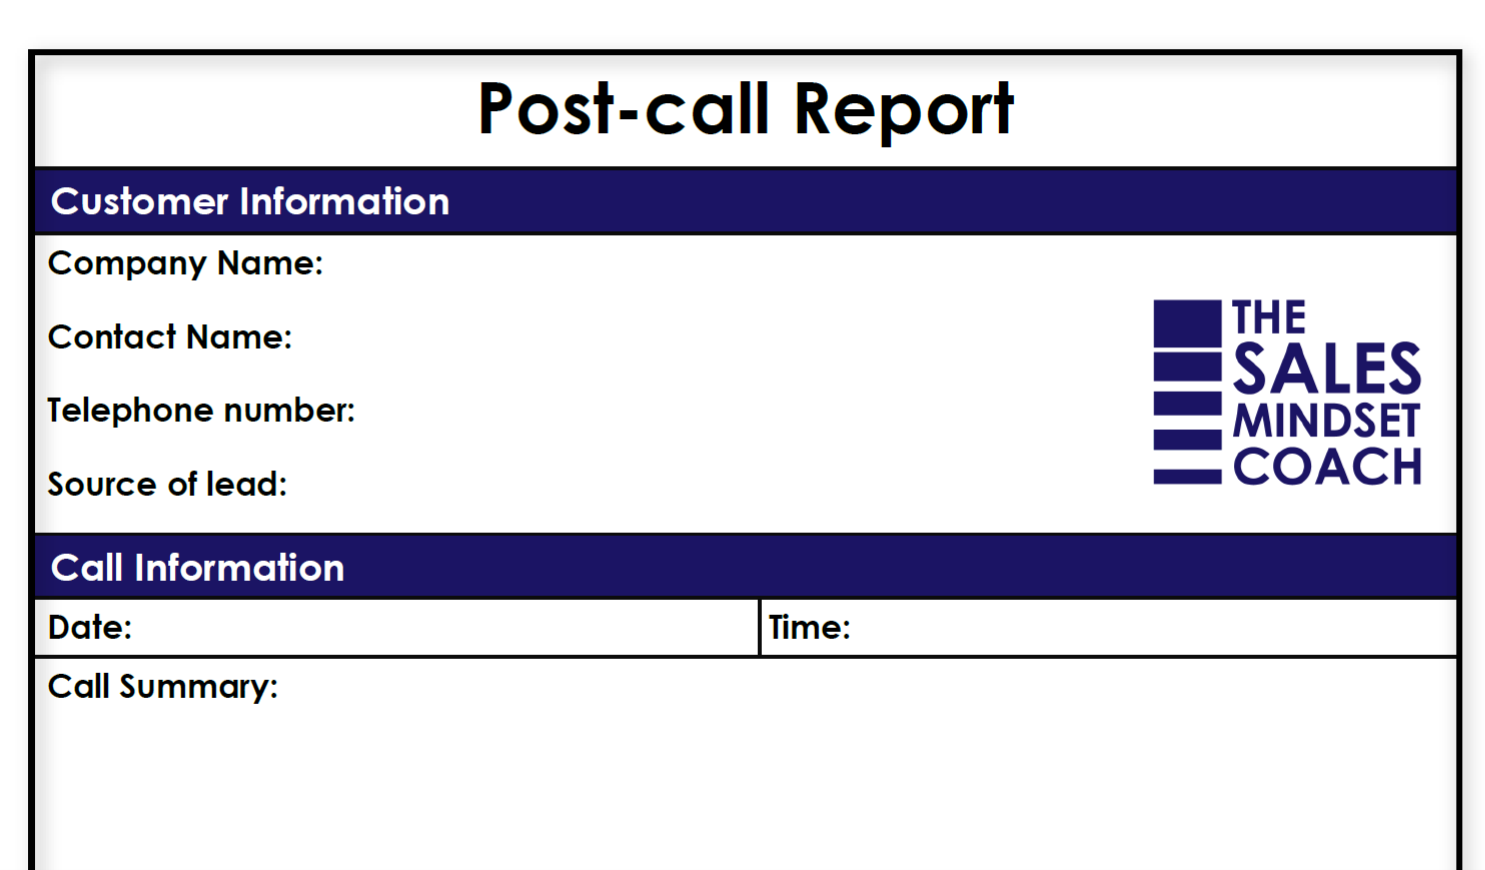 Post-call report template - The Sales Mindset Coach